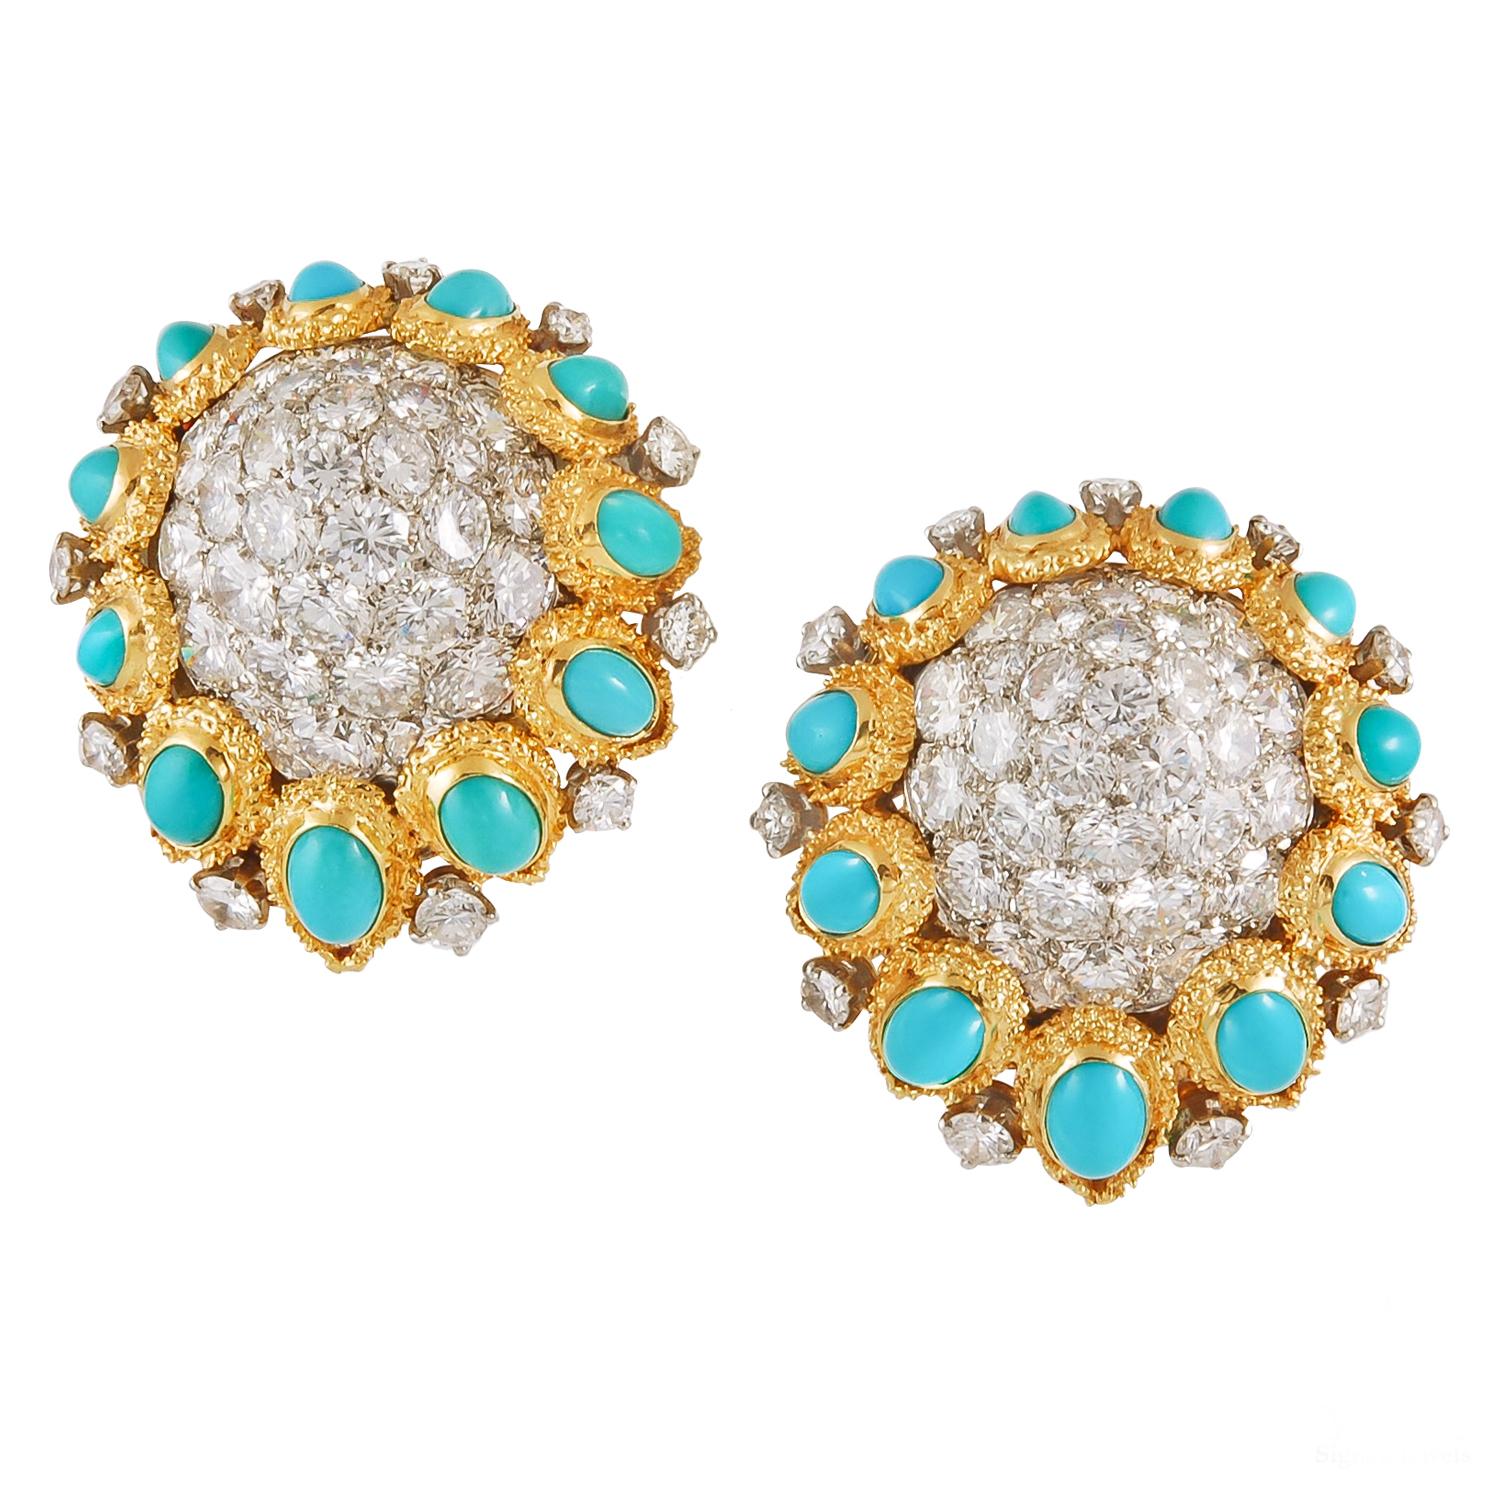 Van Cleef & Arpels Vintage 1960s Diamond Turquoise Poire Suite In Excellent Condition For Sale In New York, NY